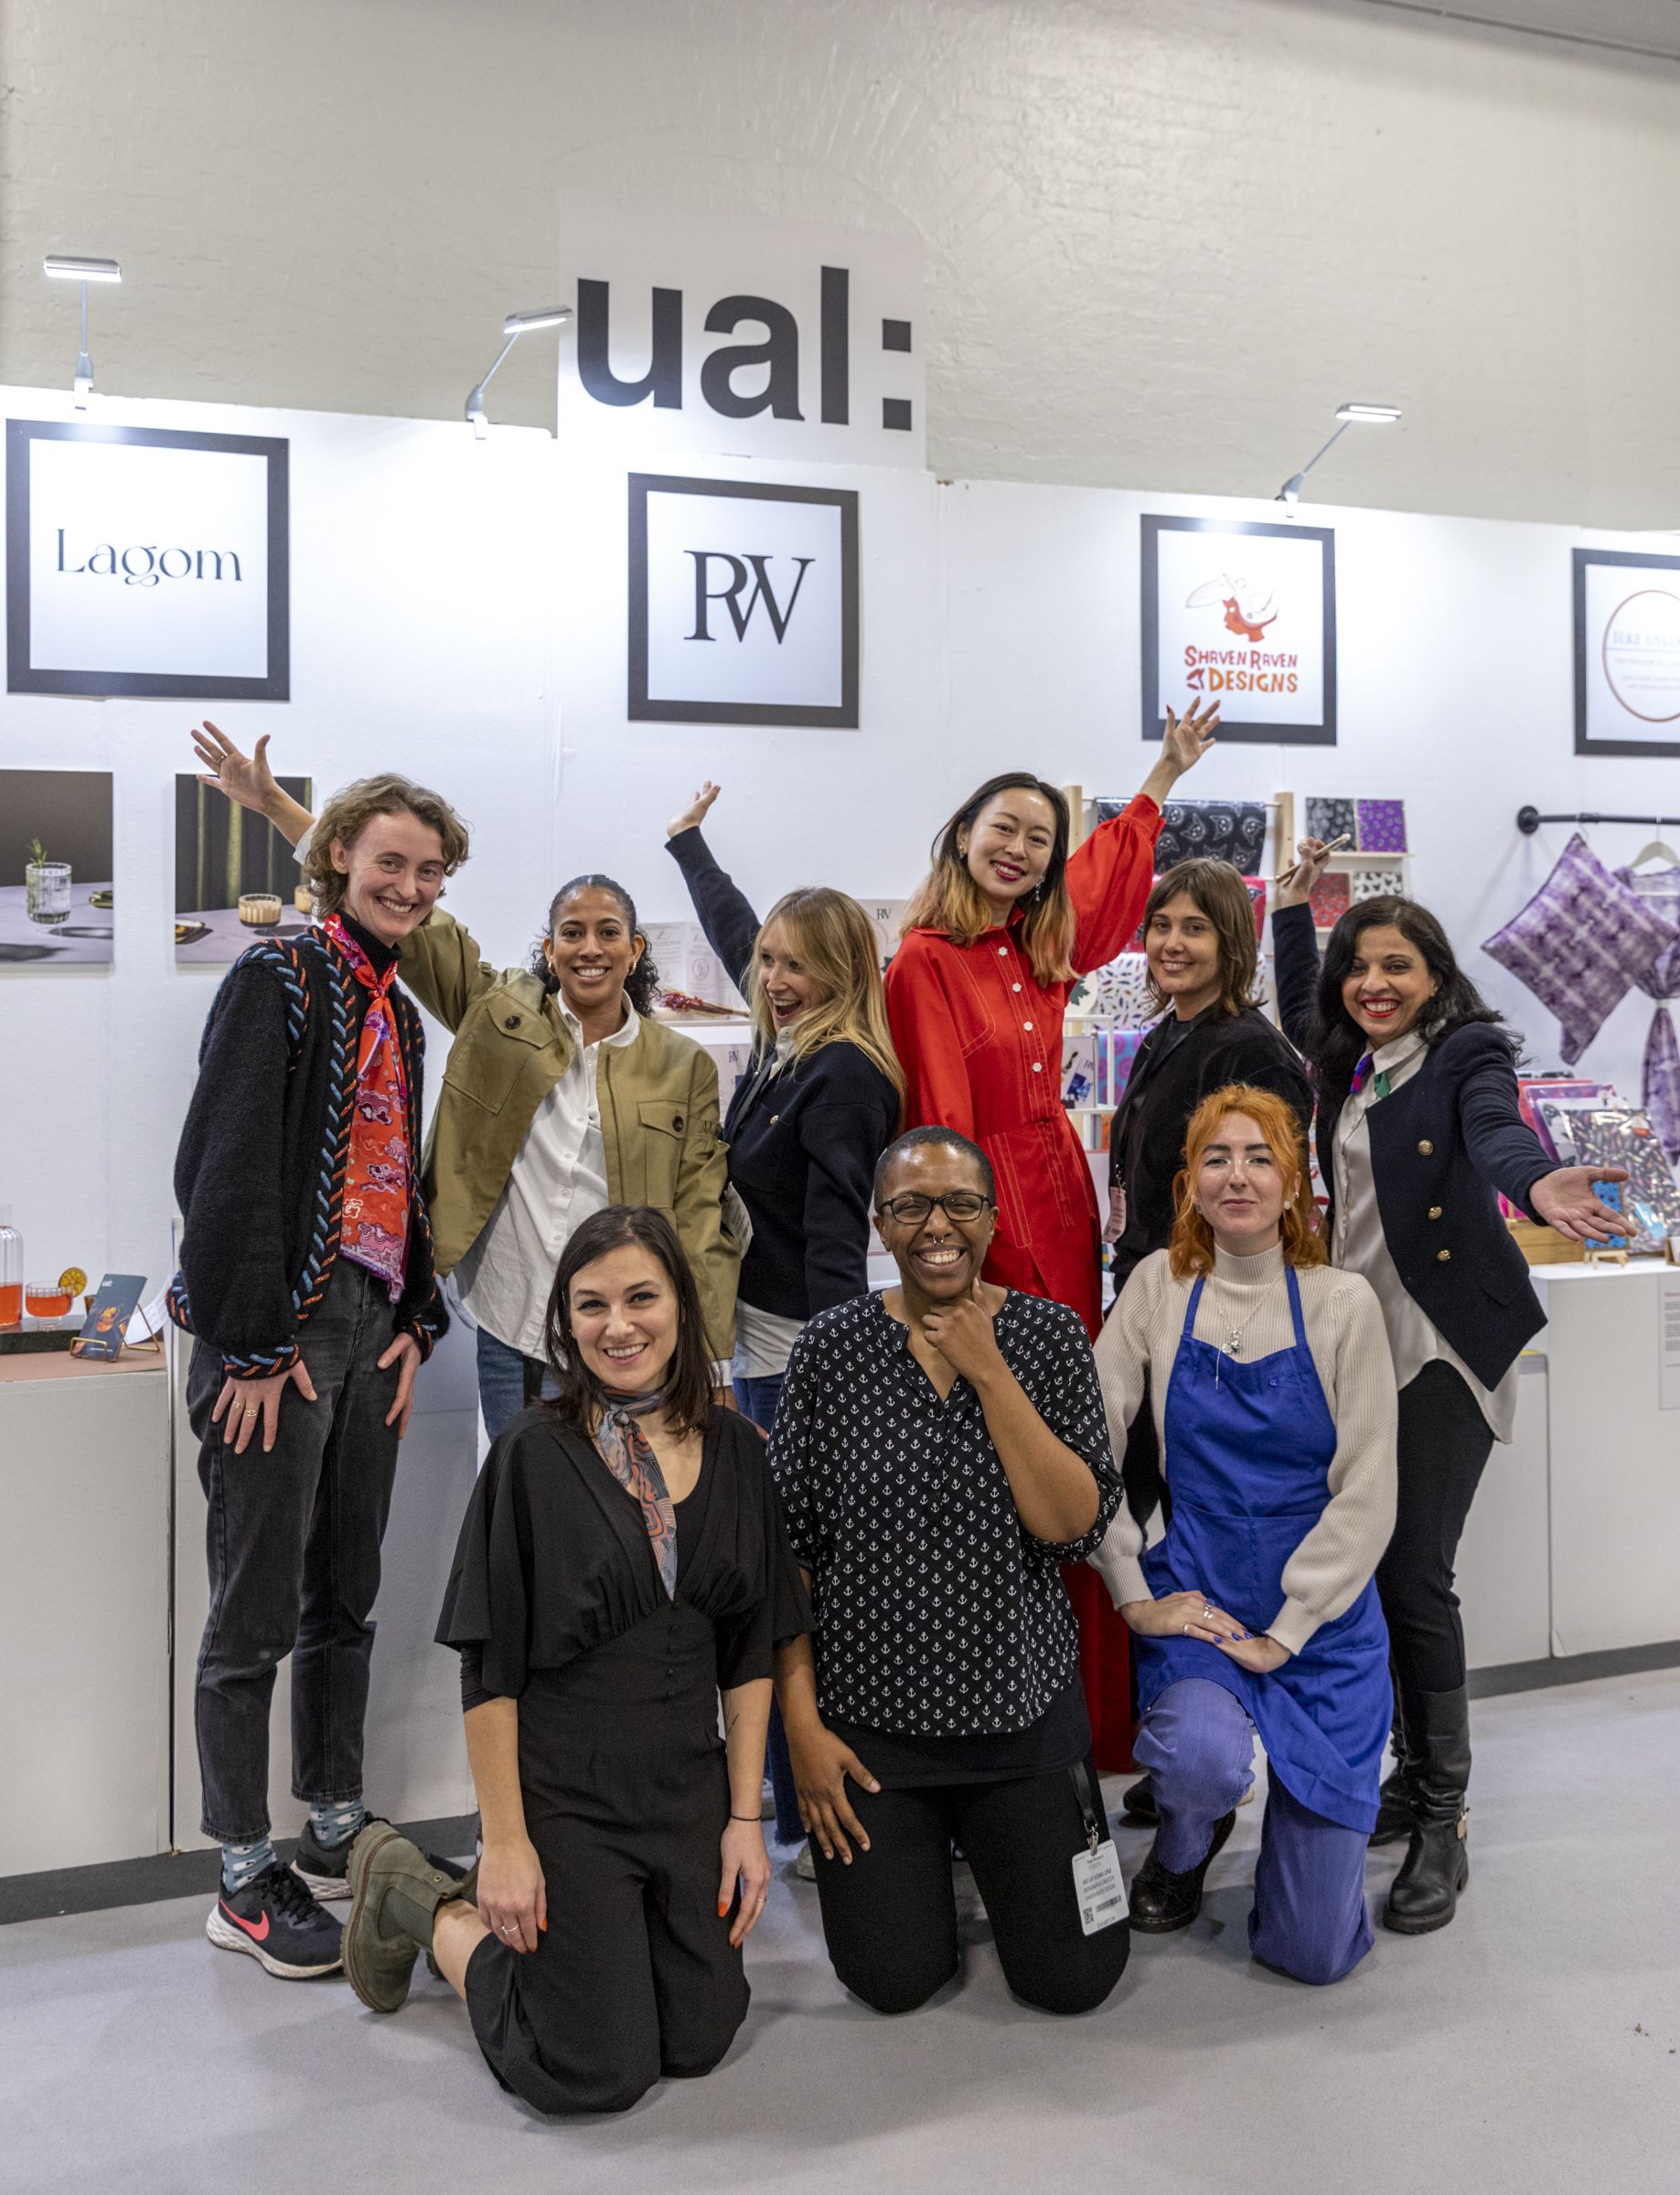 All the designers from Top Drawer pose together in front of the UAL stand